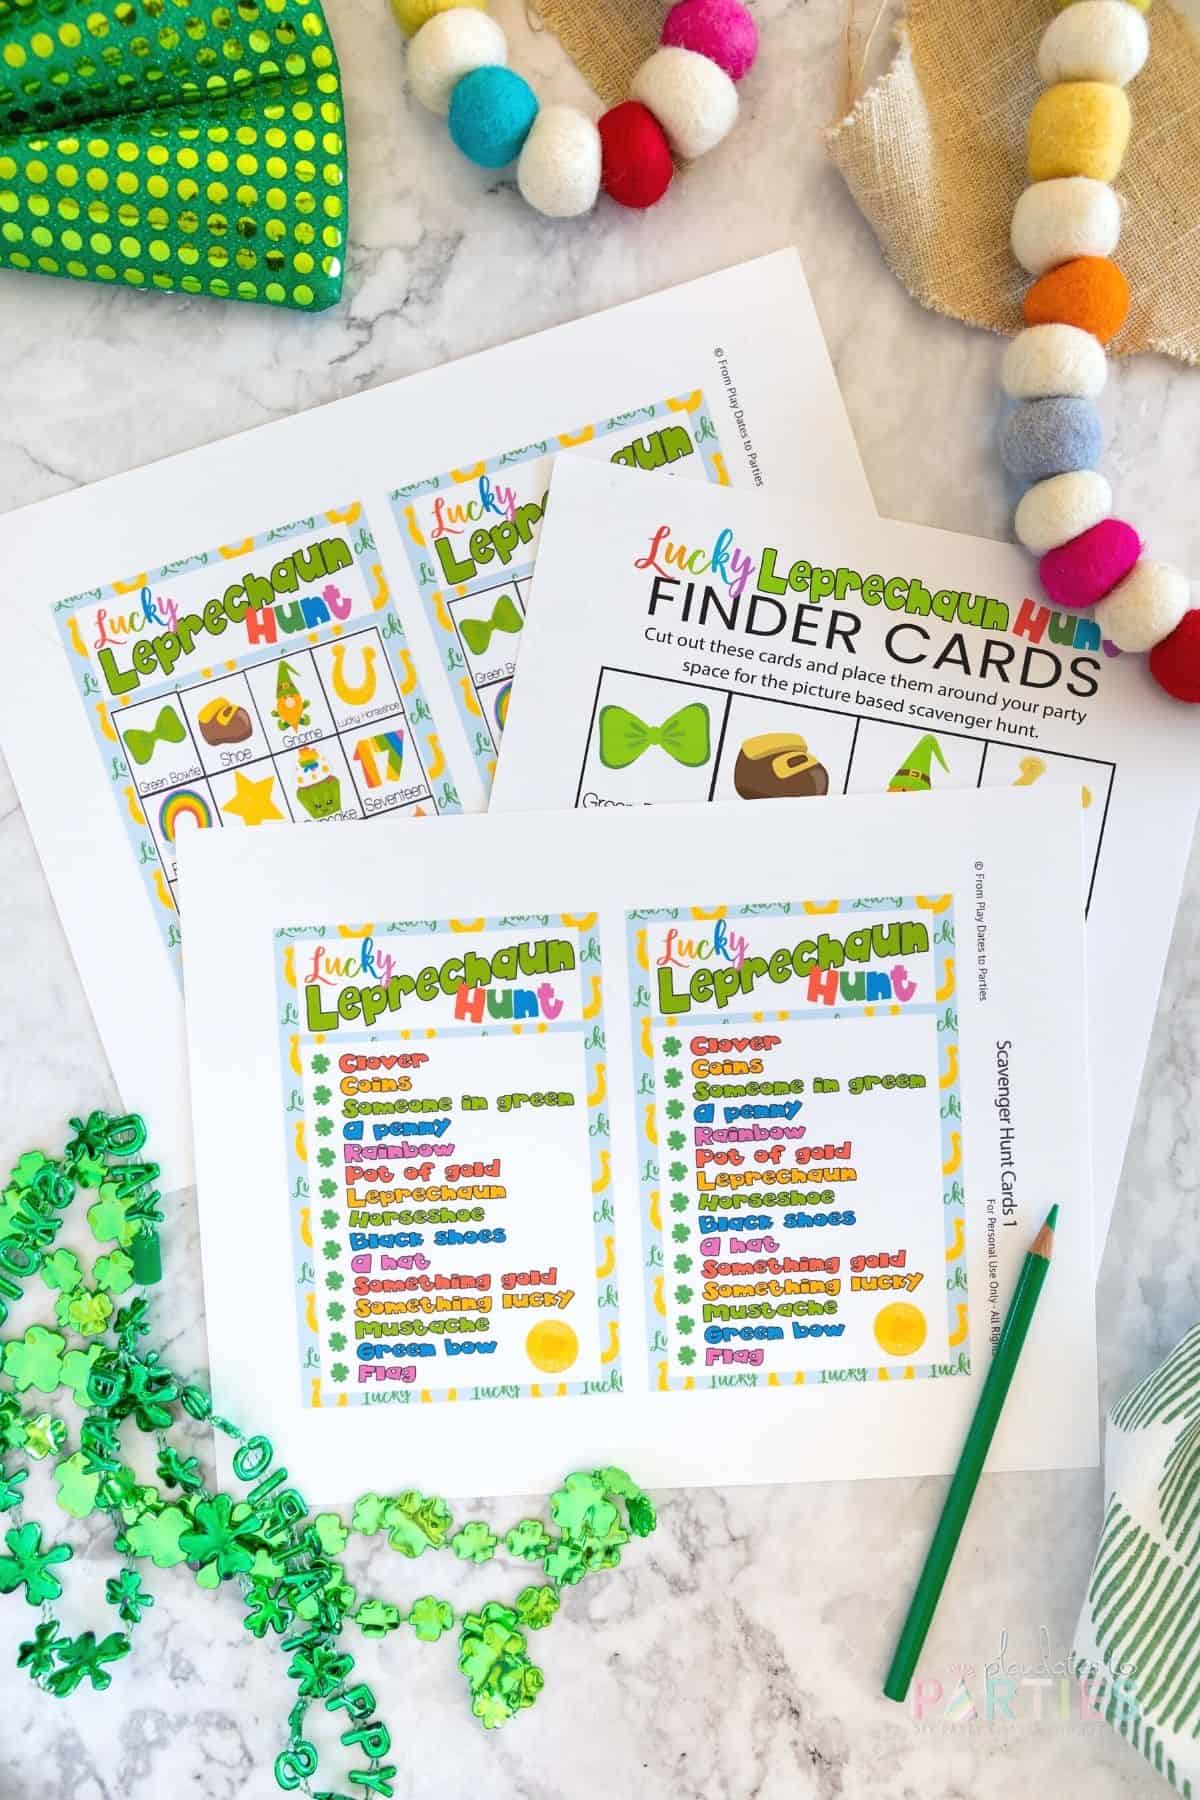 Pages included in the free printable St. Patrick's Day Scavenger Hunt.